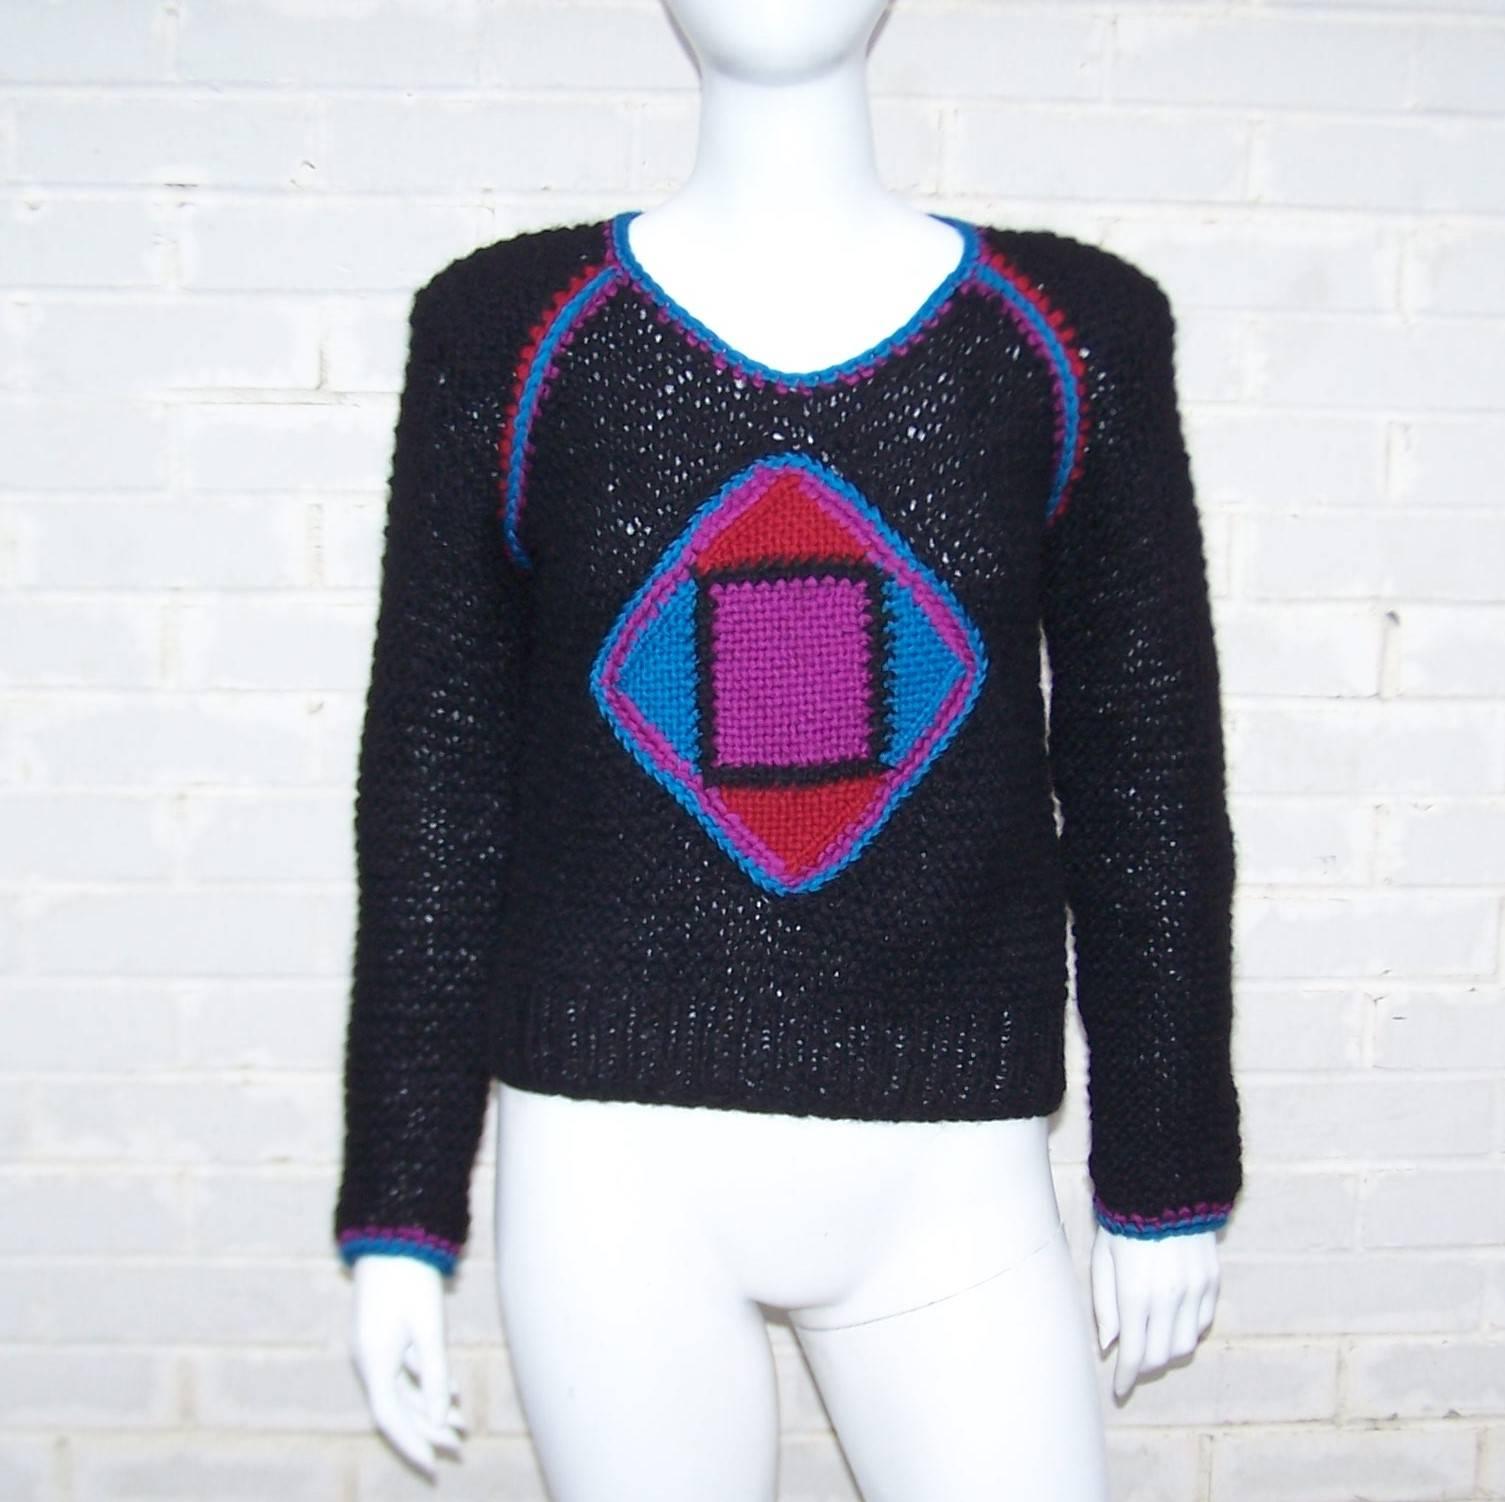 This cutie will take you from the cold days of Winter into the warm-up of Spring with a cozy design and vibrant colors.  The black hand knit wool sweater is accented with sporty graphics in contrasting colors...electric blue, purple and cherry red. 